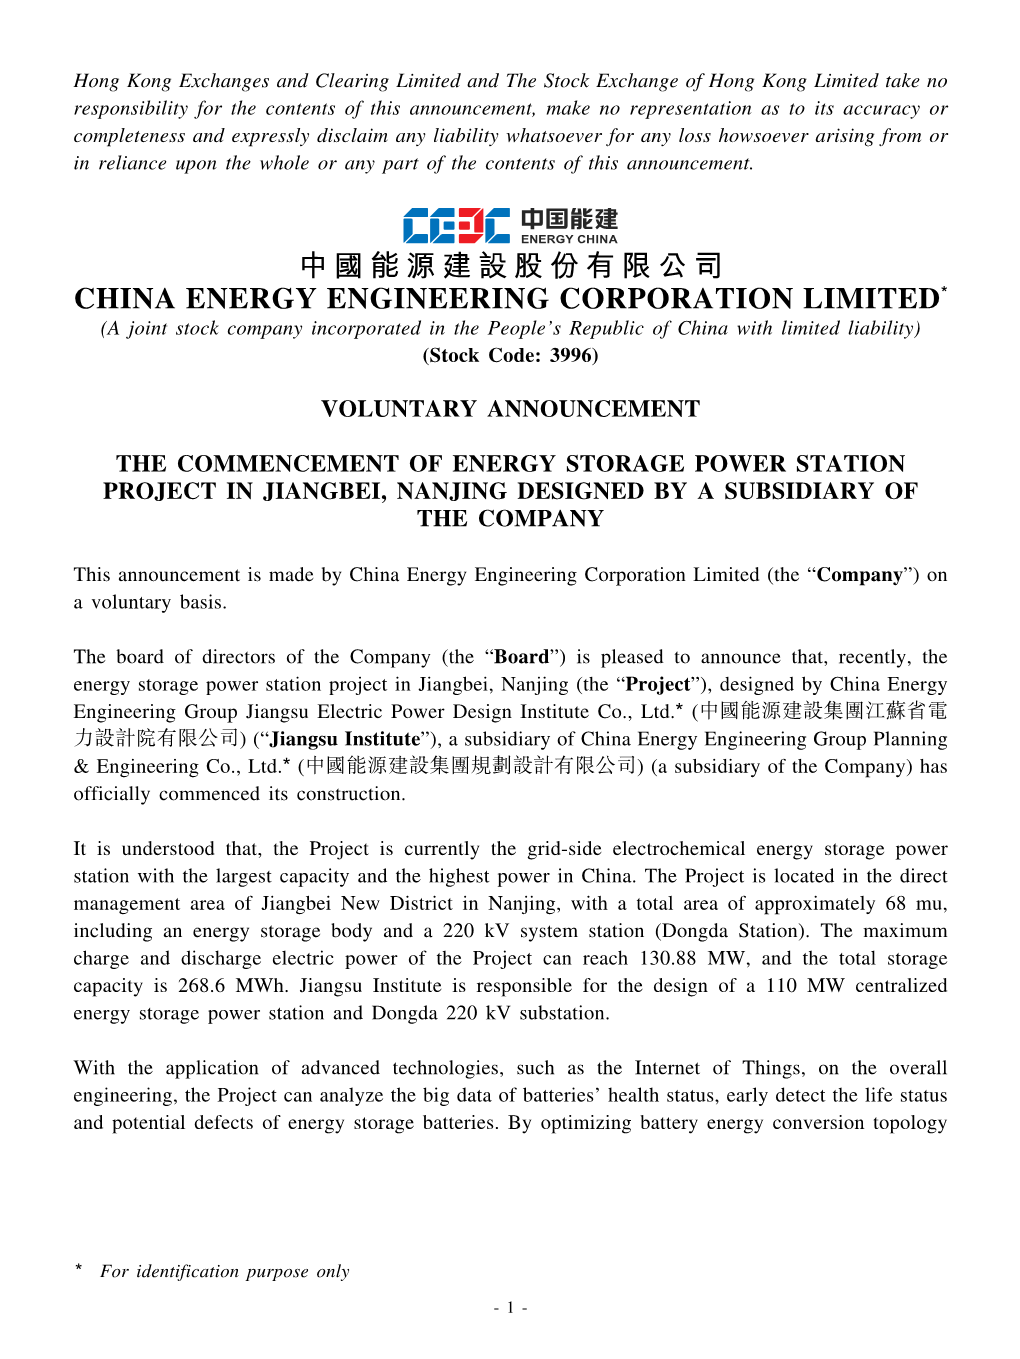 CHINA ENERGY ENGINEERING CORPORATION LIMITED* (A Joint Stock Company Incorporated in the People’S Republic of China with Limited Liability) (Stock Code: 3996)